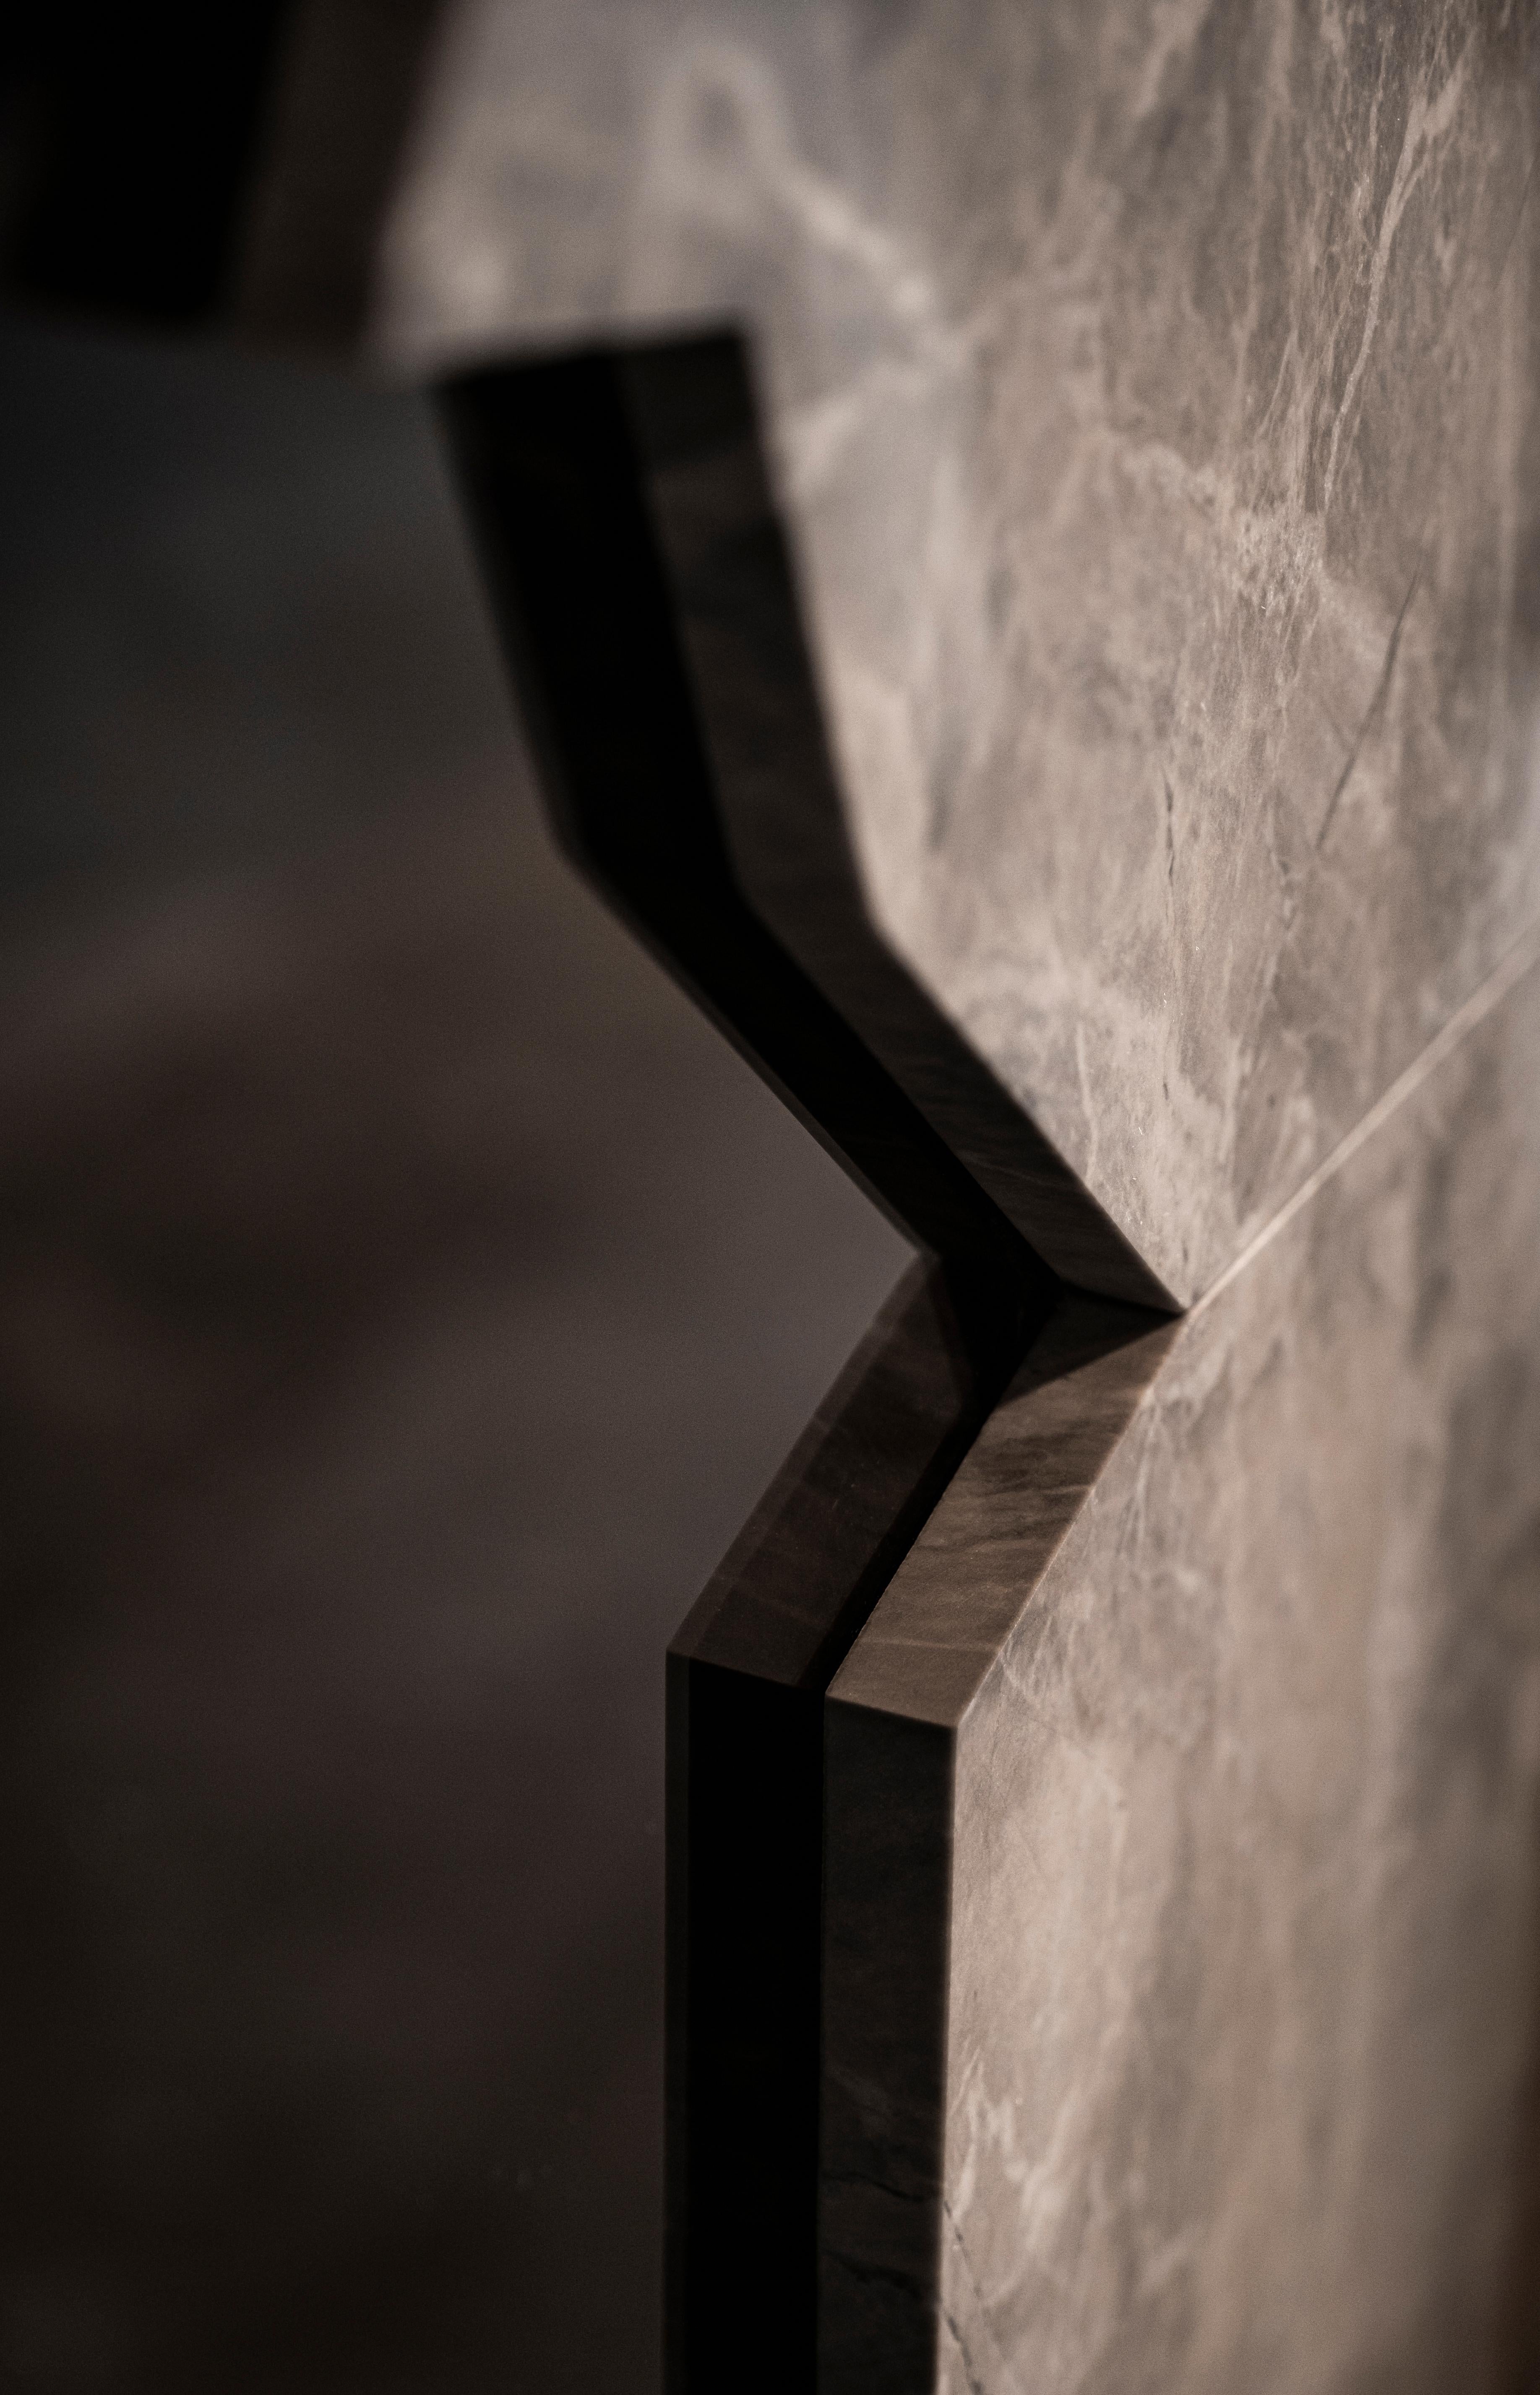 Combining marble with mirror, Lect X reinterprets the place of mirror in decoration with its artistic design. Designed by Yaman Pamukcu, it came to life with its modern form with the delicate processing of marble.

The natural veins and unique